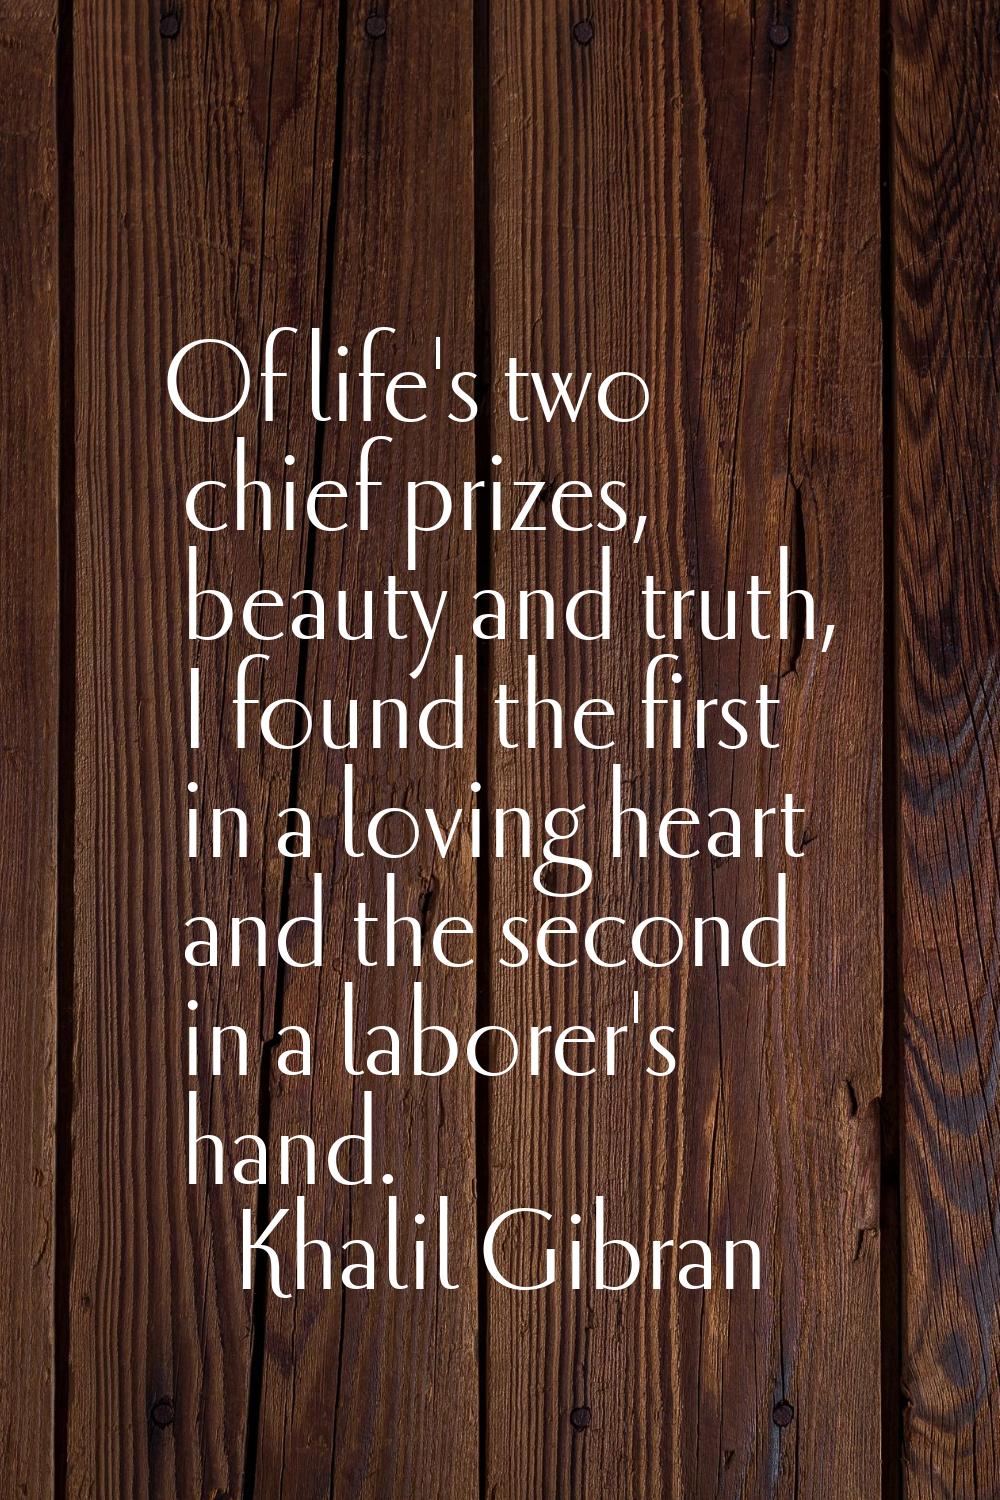 Of life's two chief prizes, beauty and truth, I found the first in a loving heart and the second in